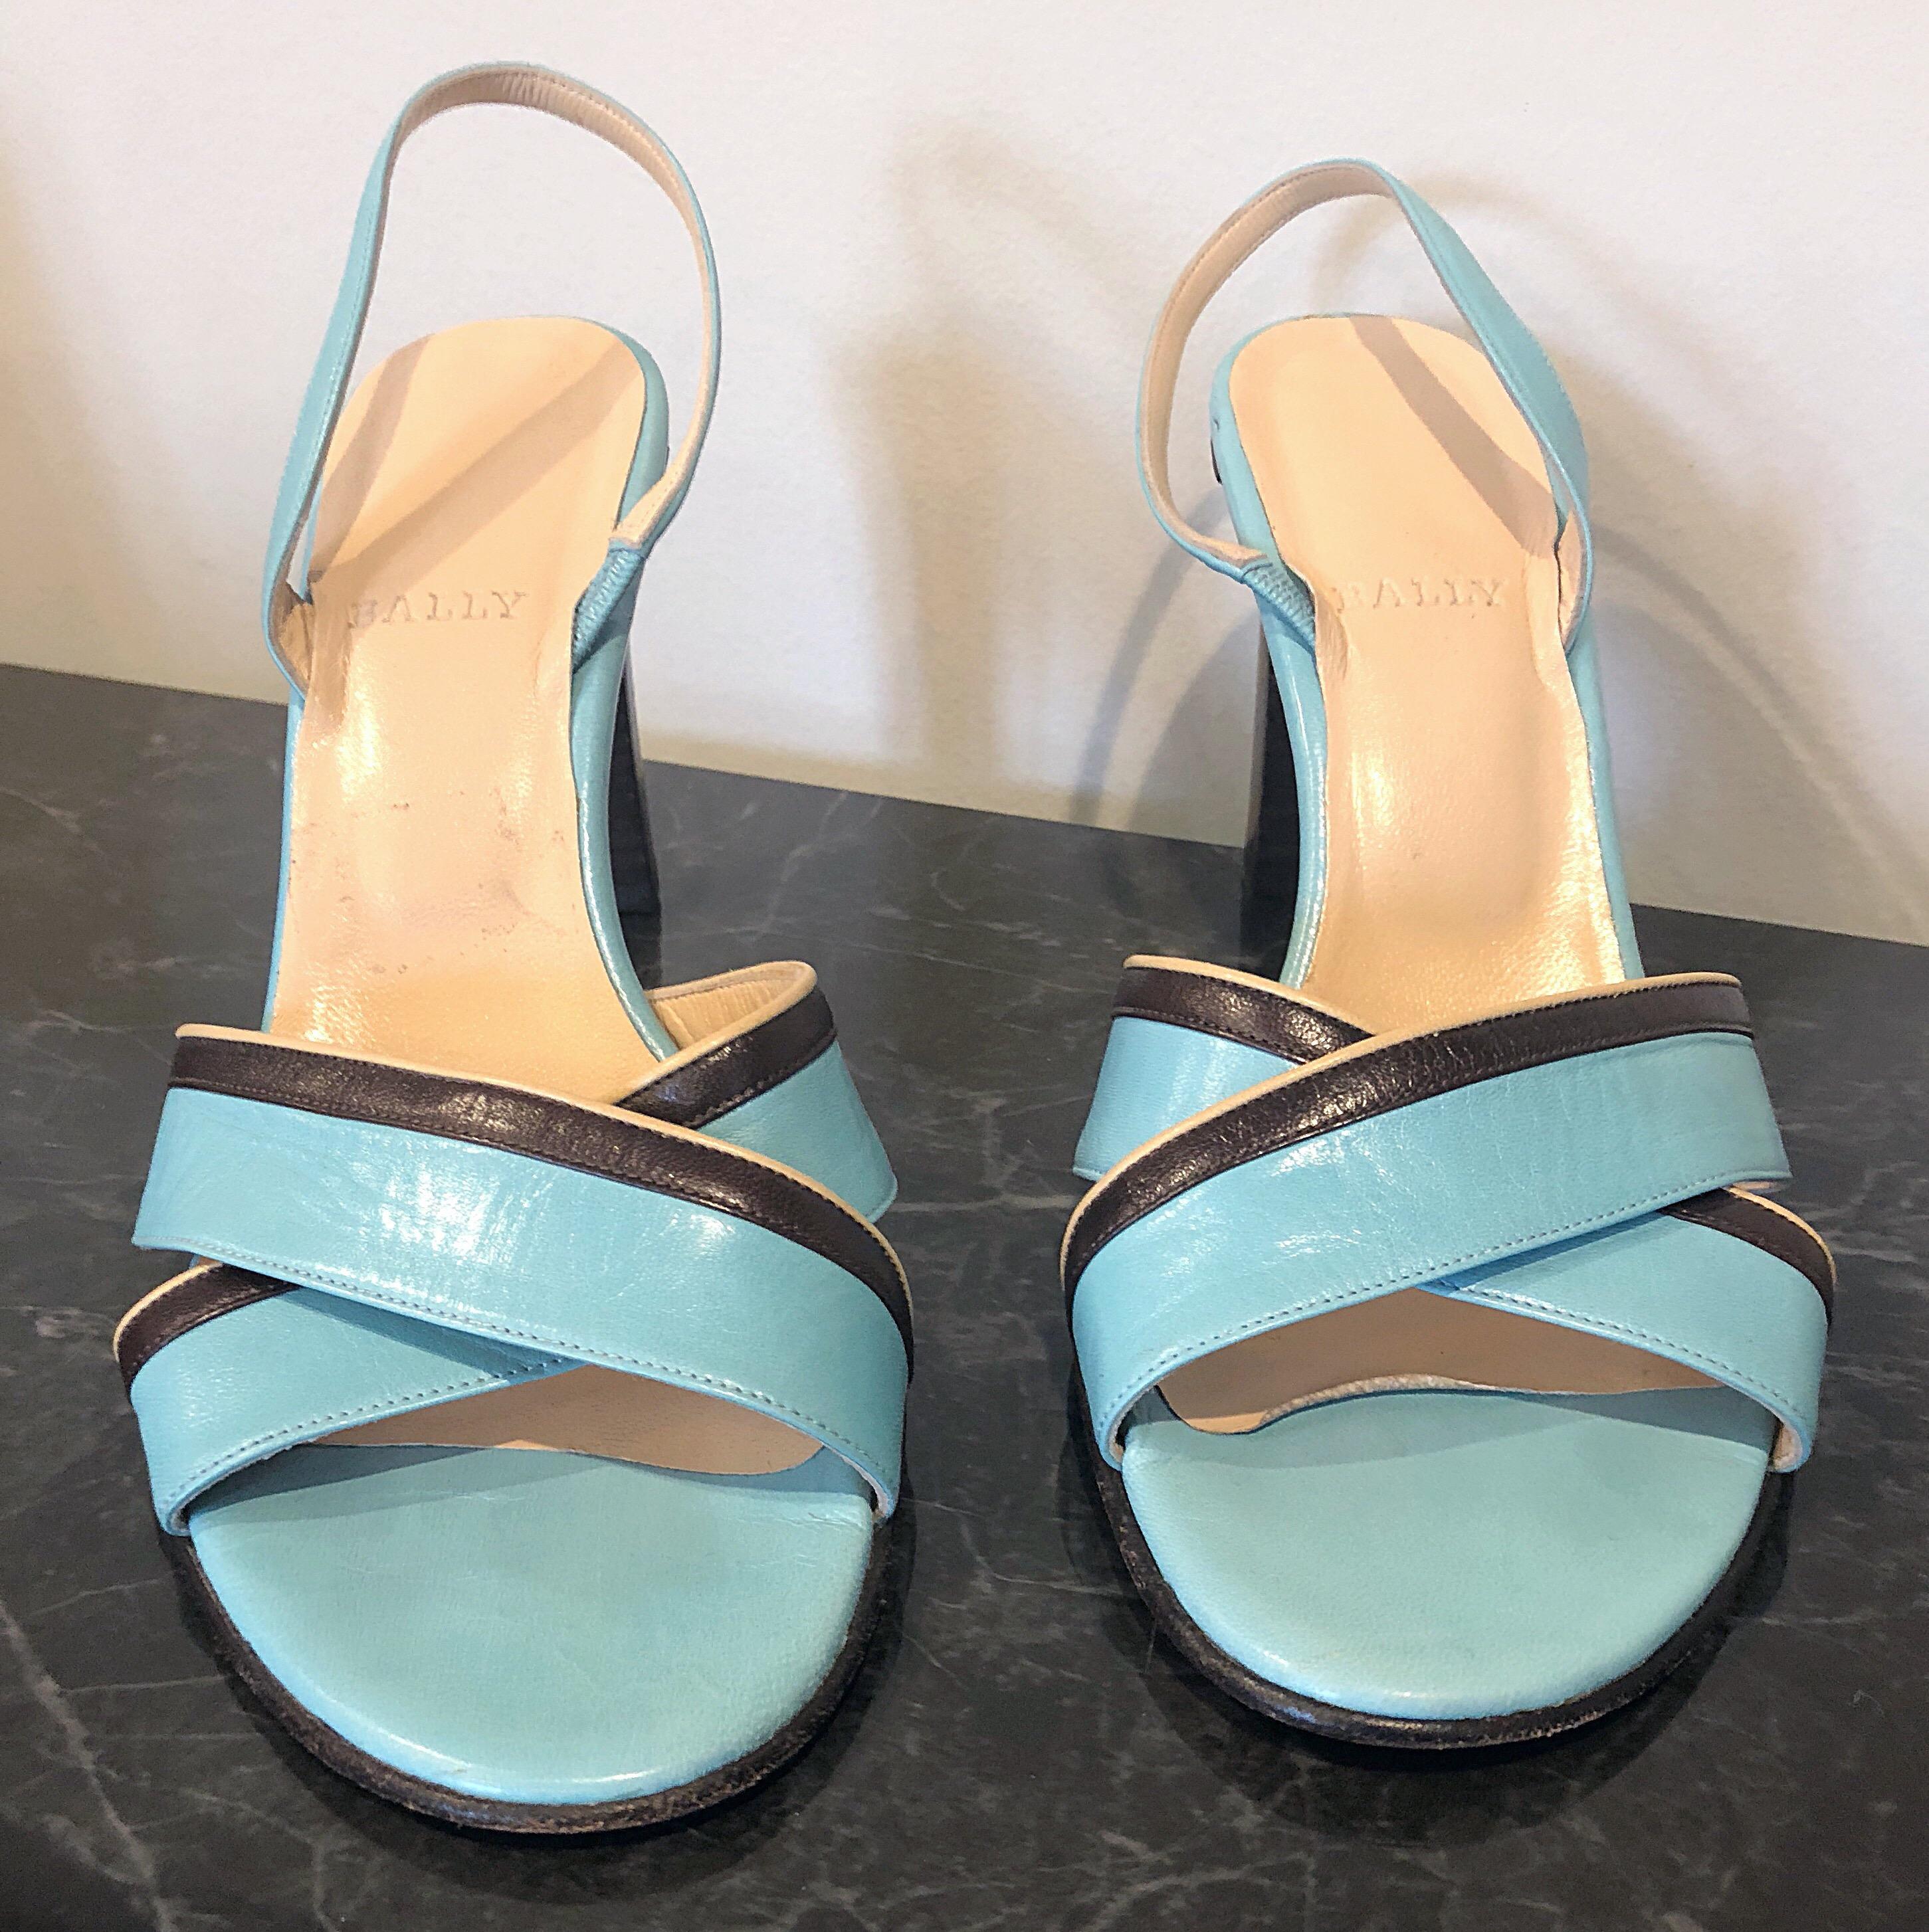 1990s Bally Sz 10 / 40.5 Robins Egg Blue Leather Vintage Stacked Heel Sandals In Excellent Condition For Sale In San Diego, CA